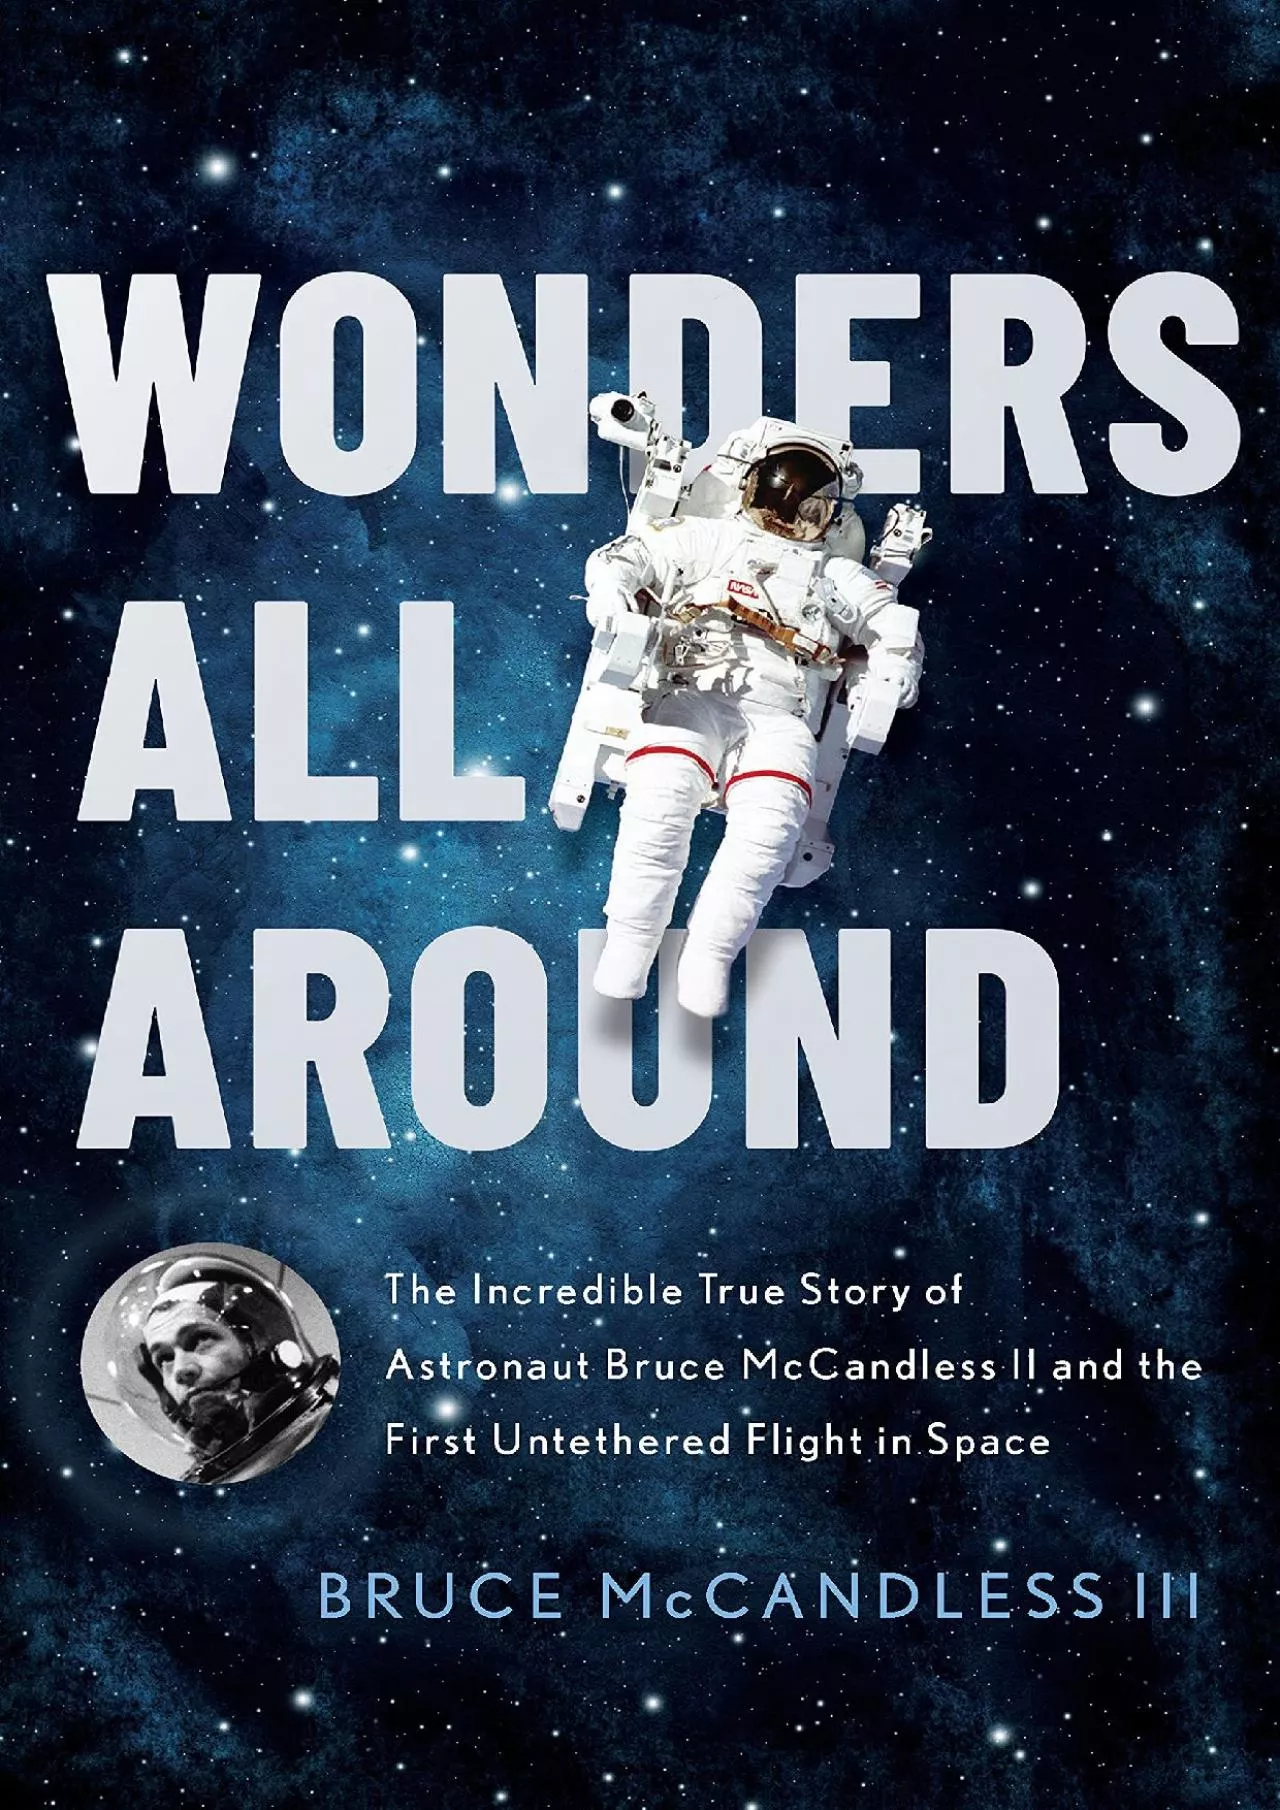 (BOOK)-Wonders All Around: The Incredible True Story of Astronaut Bruce McCandless II